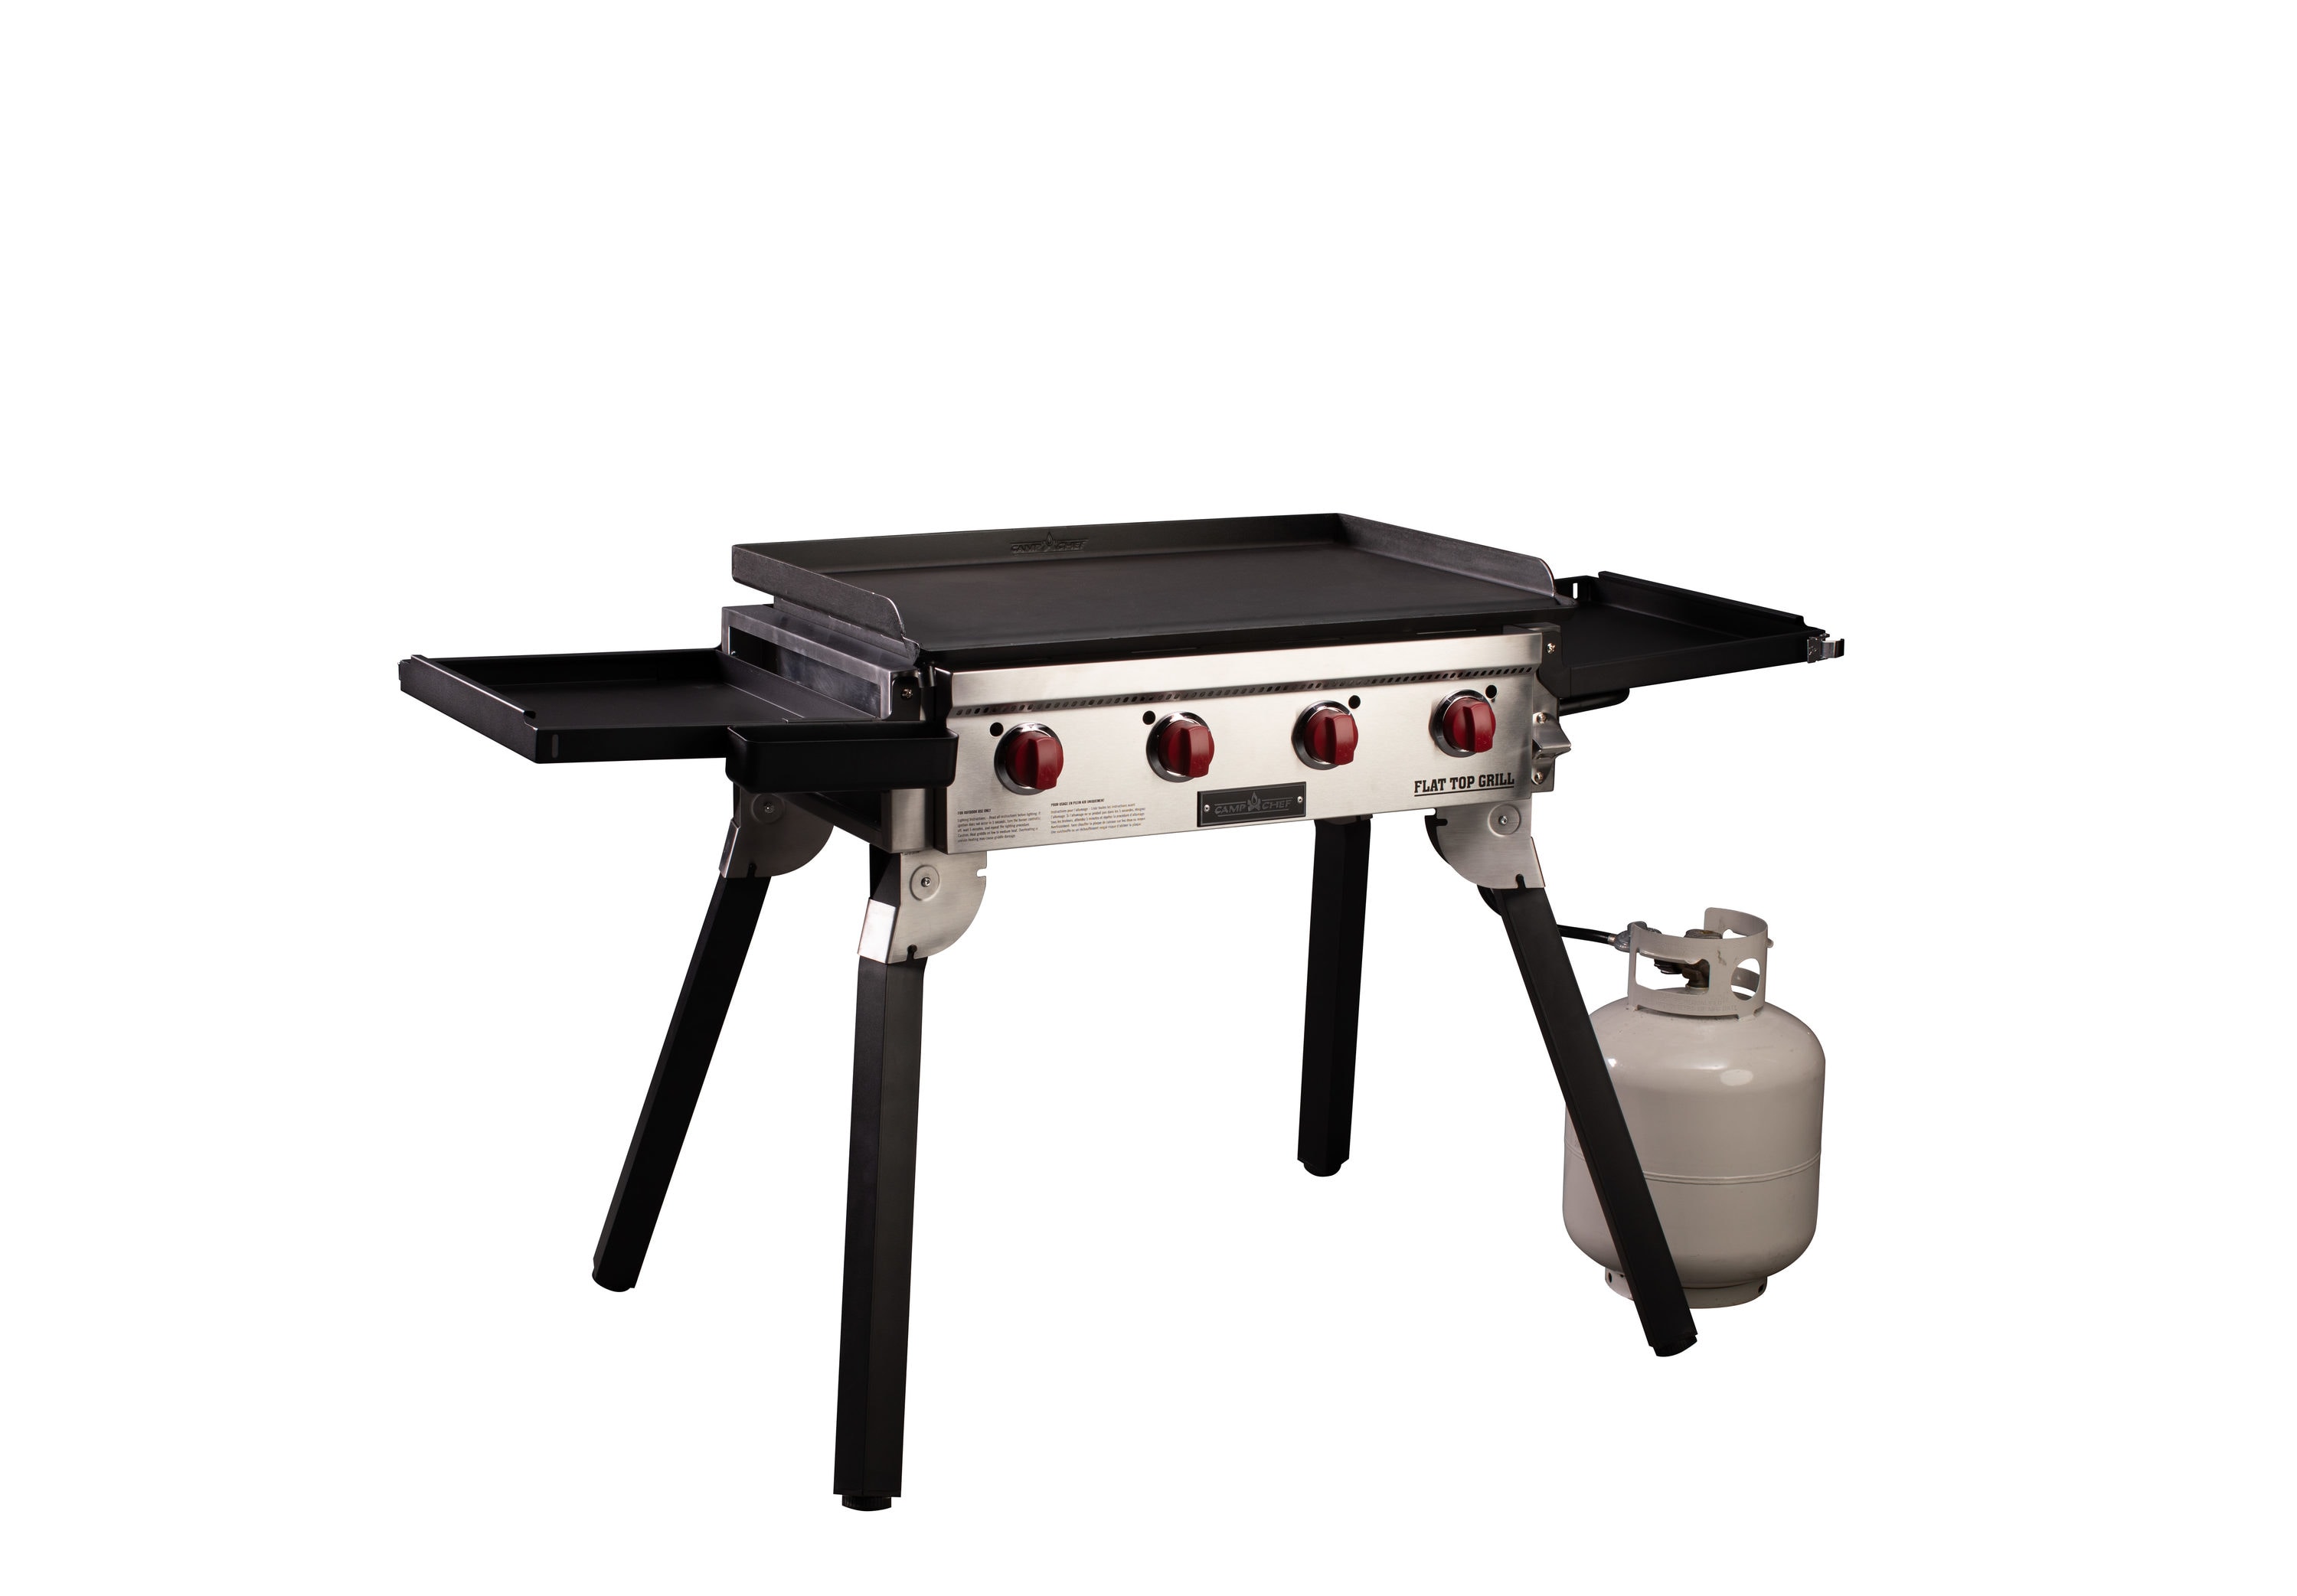 Camp Chef Portable Flat Top Grill 900 - FTG900, 6 Burner Stove